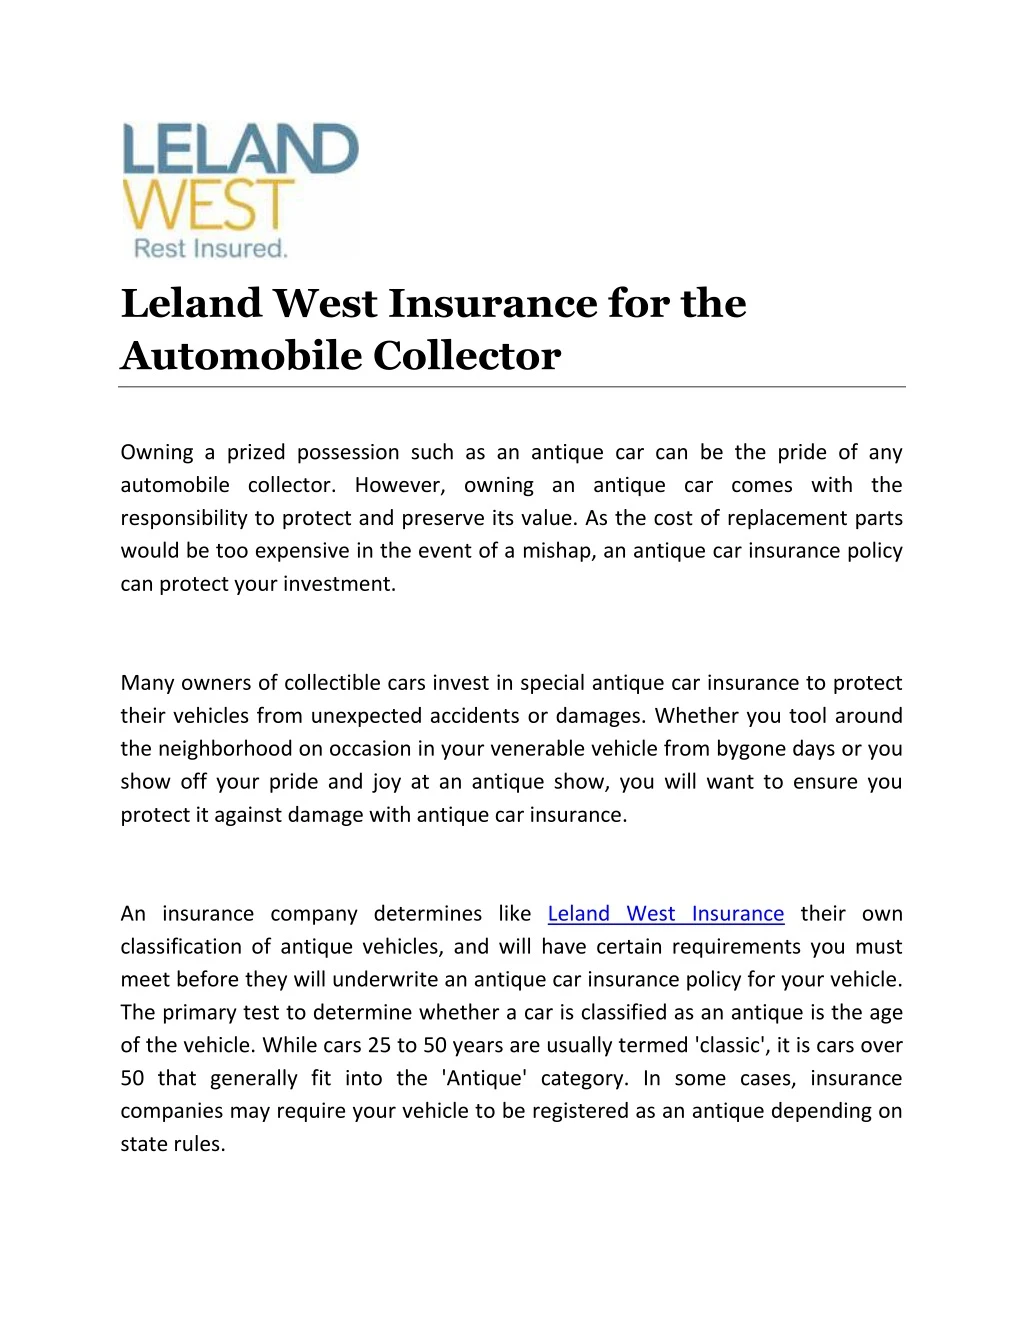 leland west insurance for the automobile collector